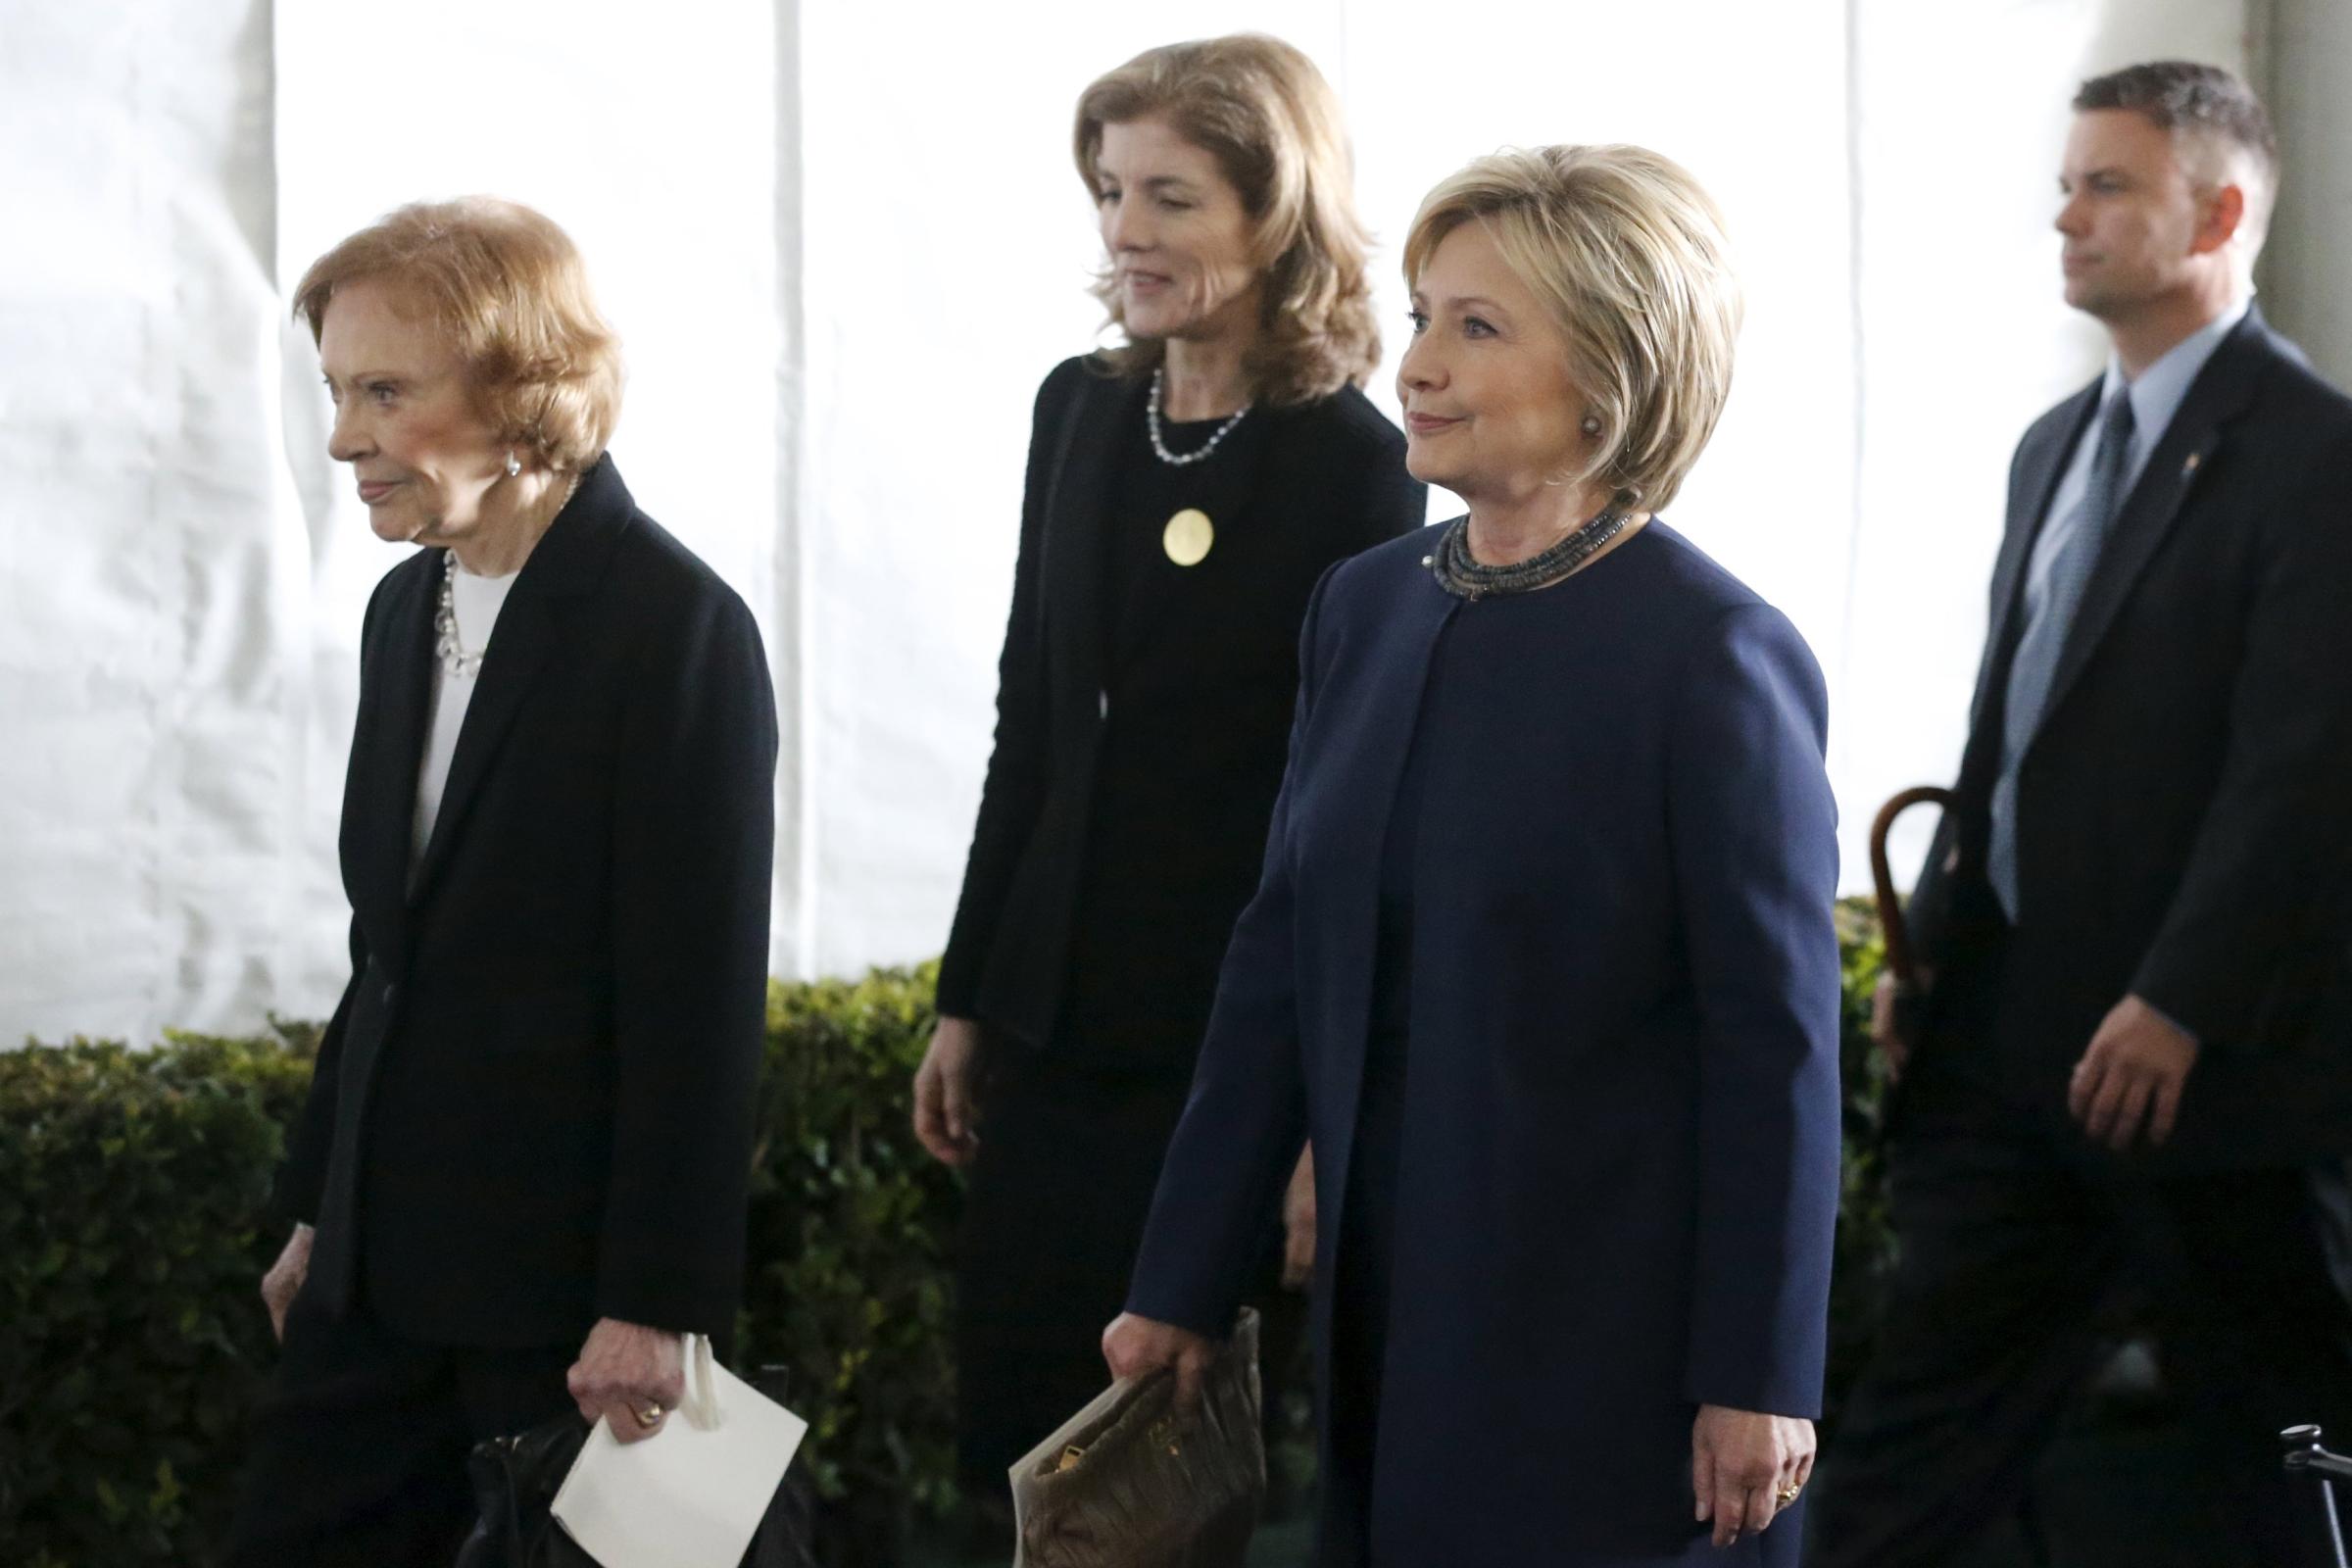 Former first lady Rosalynn Carter, Caroline Kennedy, and Hillary Clinton walk to the grave site after the funeral of Nancy Reagan at the Ronald Reagan Presidential Library in Simi Valley